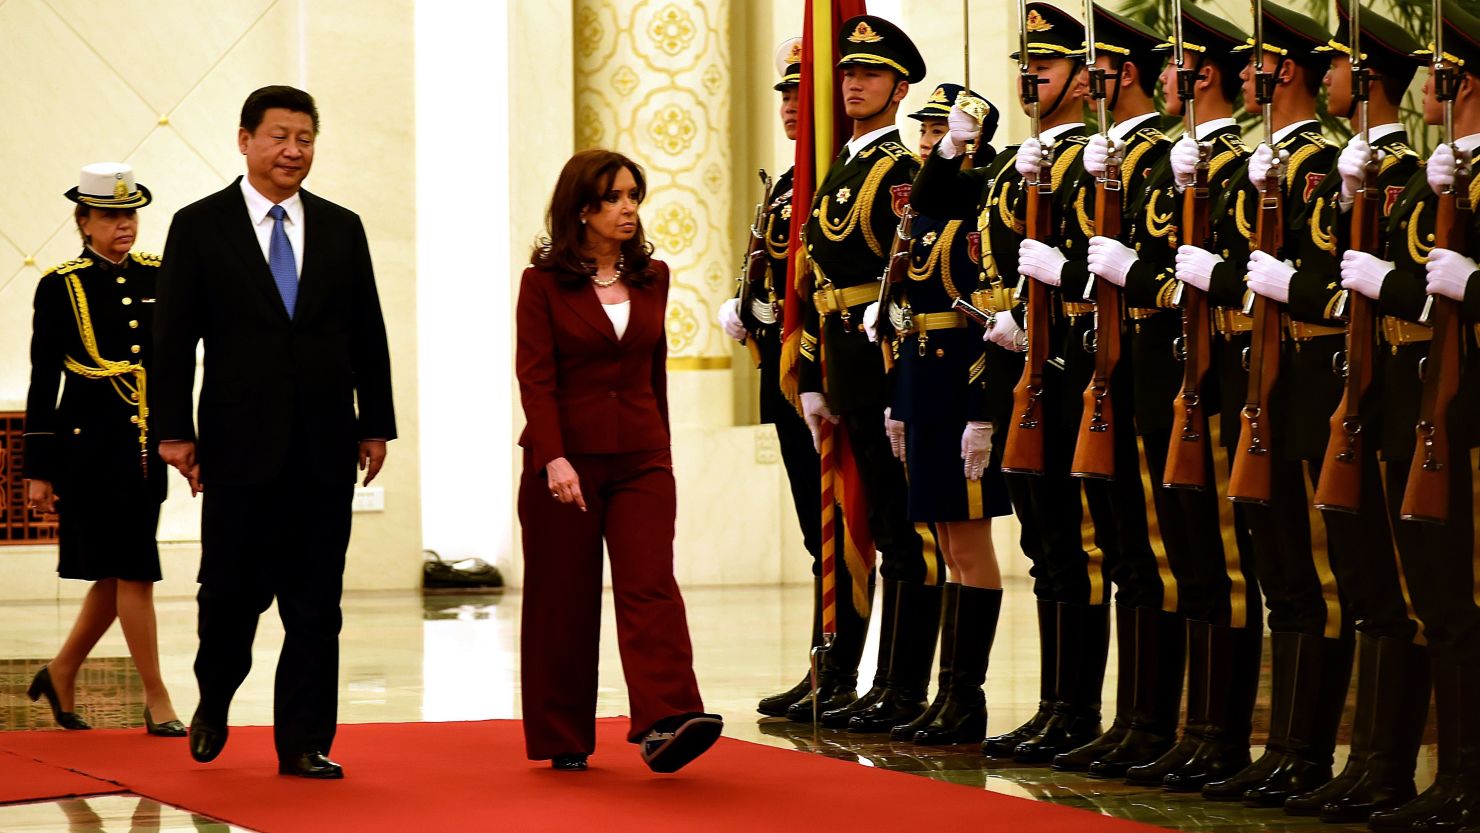 Chinese President Xi Jinping and Argentine President Cristina Kirchner  during the welcoming ceremony at the Great Hall of the People in Beijing, February 4, 2015.